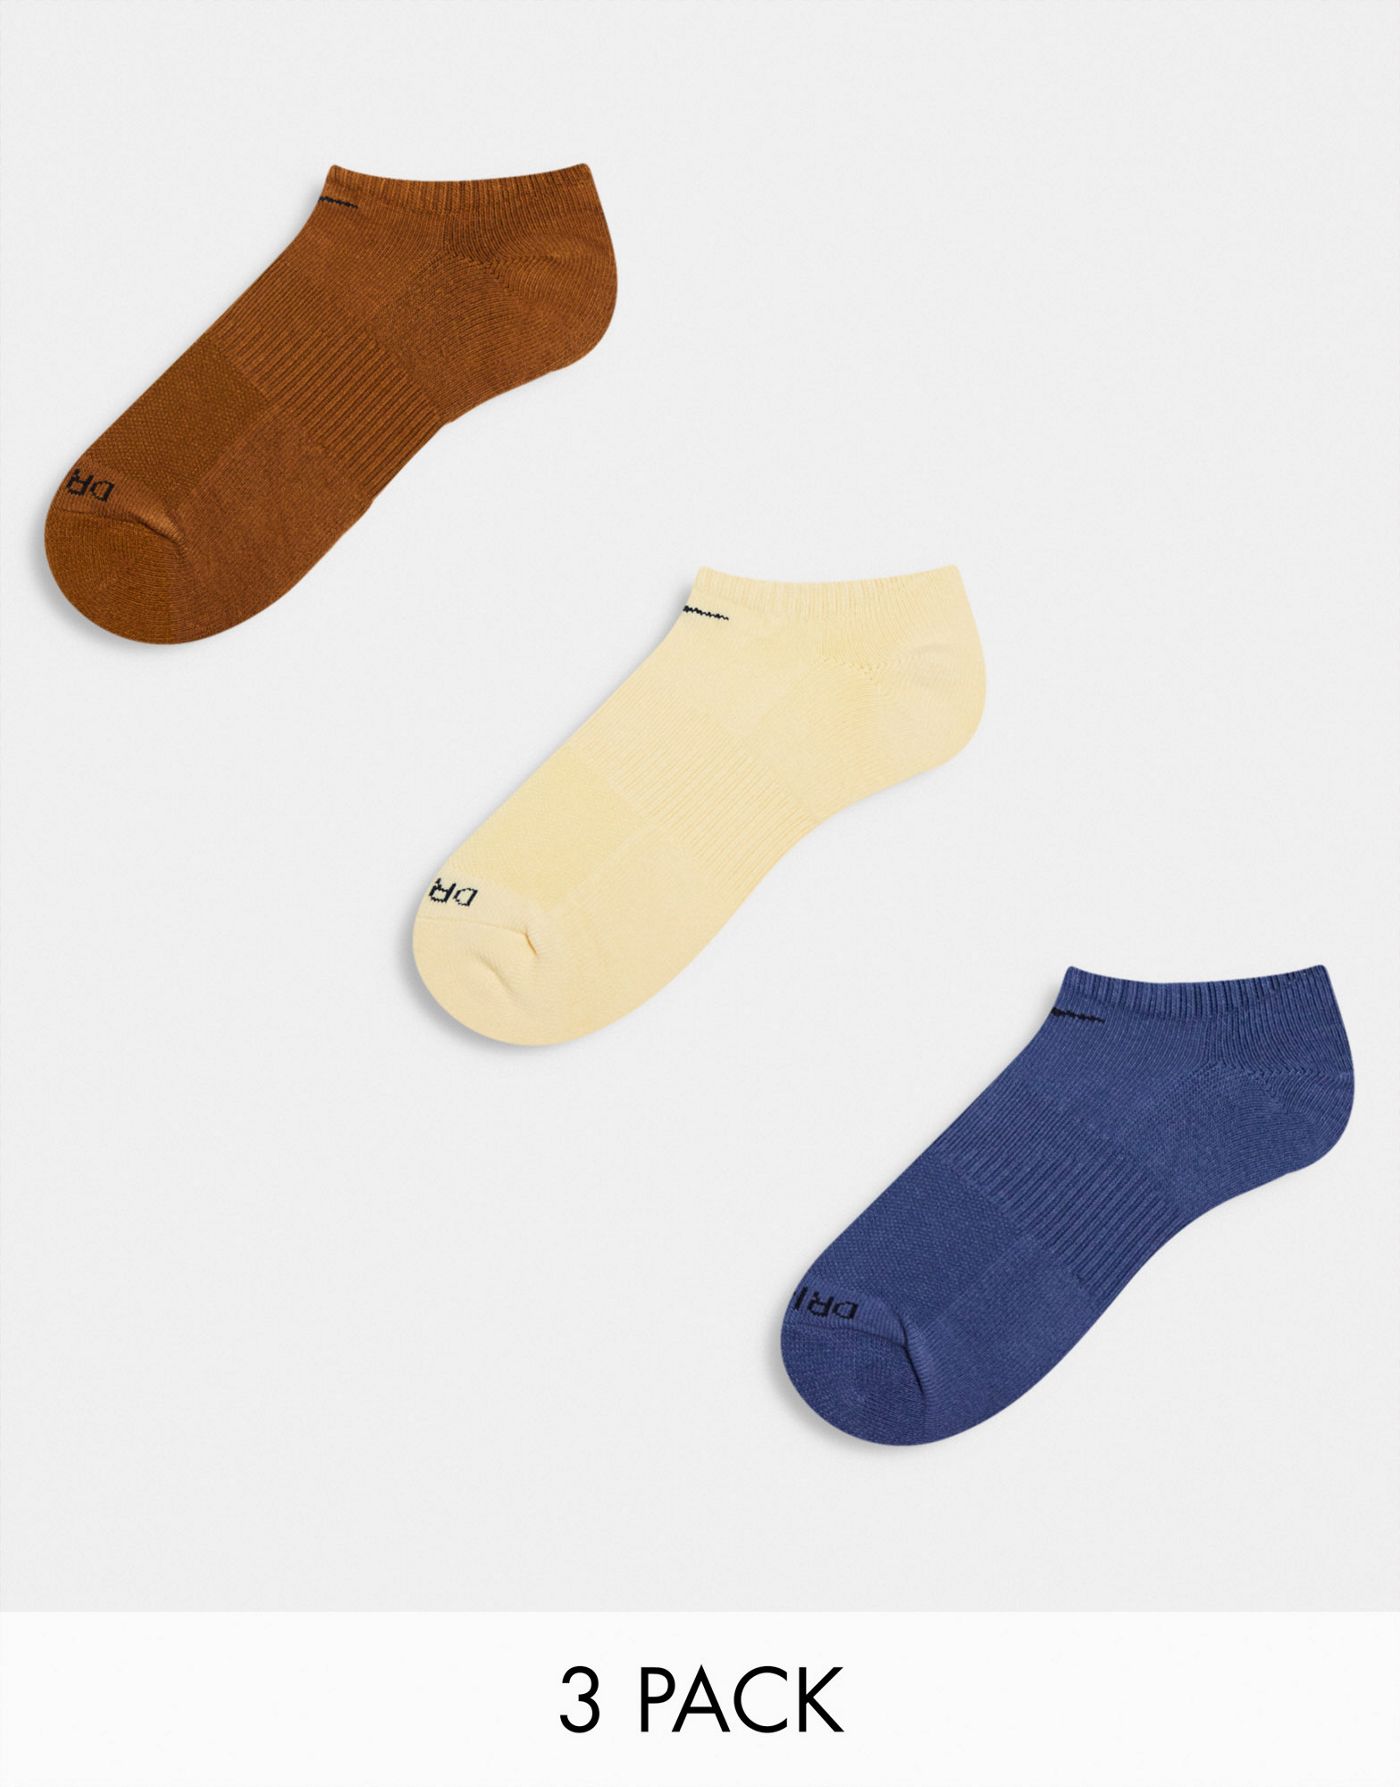 Nike Training Everyday Plus 3-pack no show socks in blue, vanilla and brown